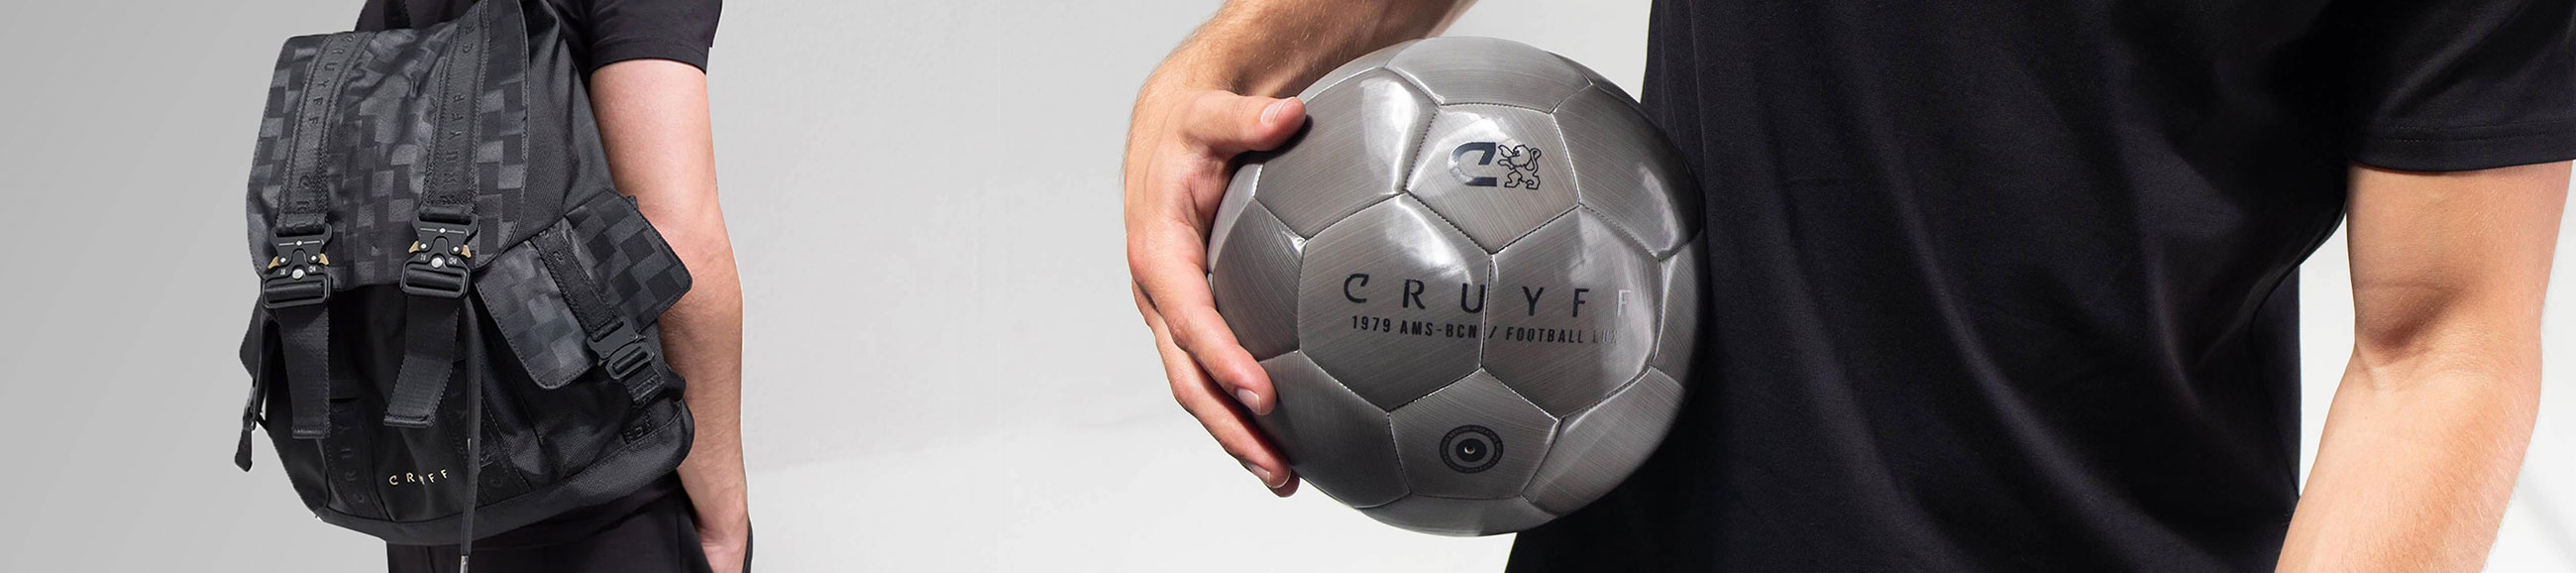 Shop all Cruyff collectors items | Pay later with Klarna | Fast worldwide delivery